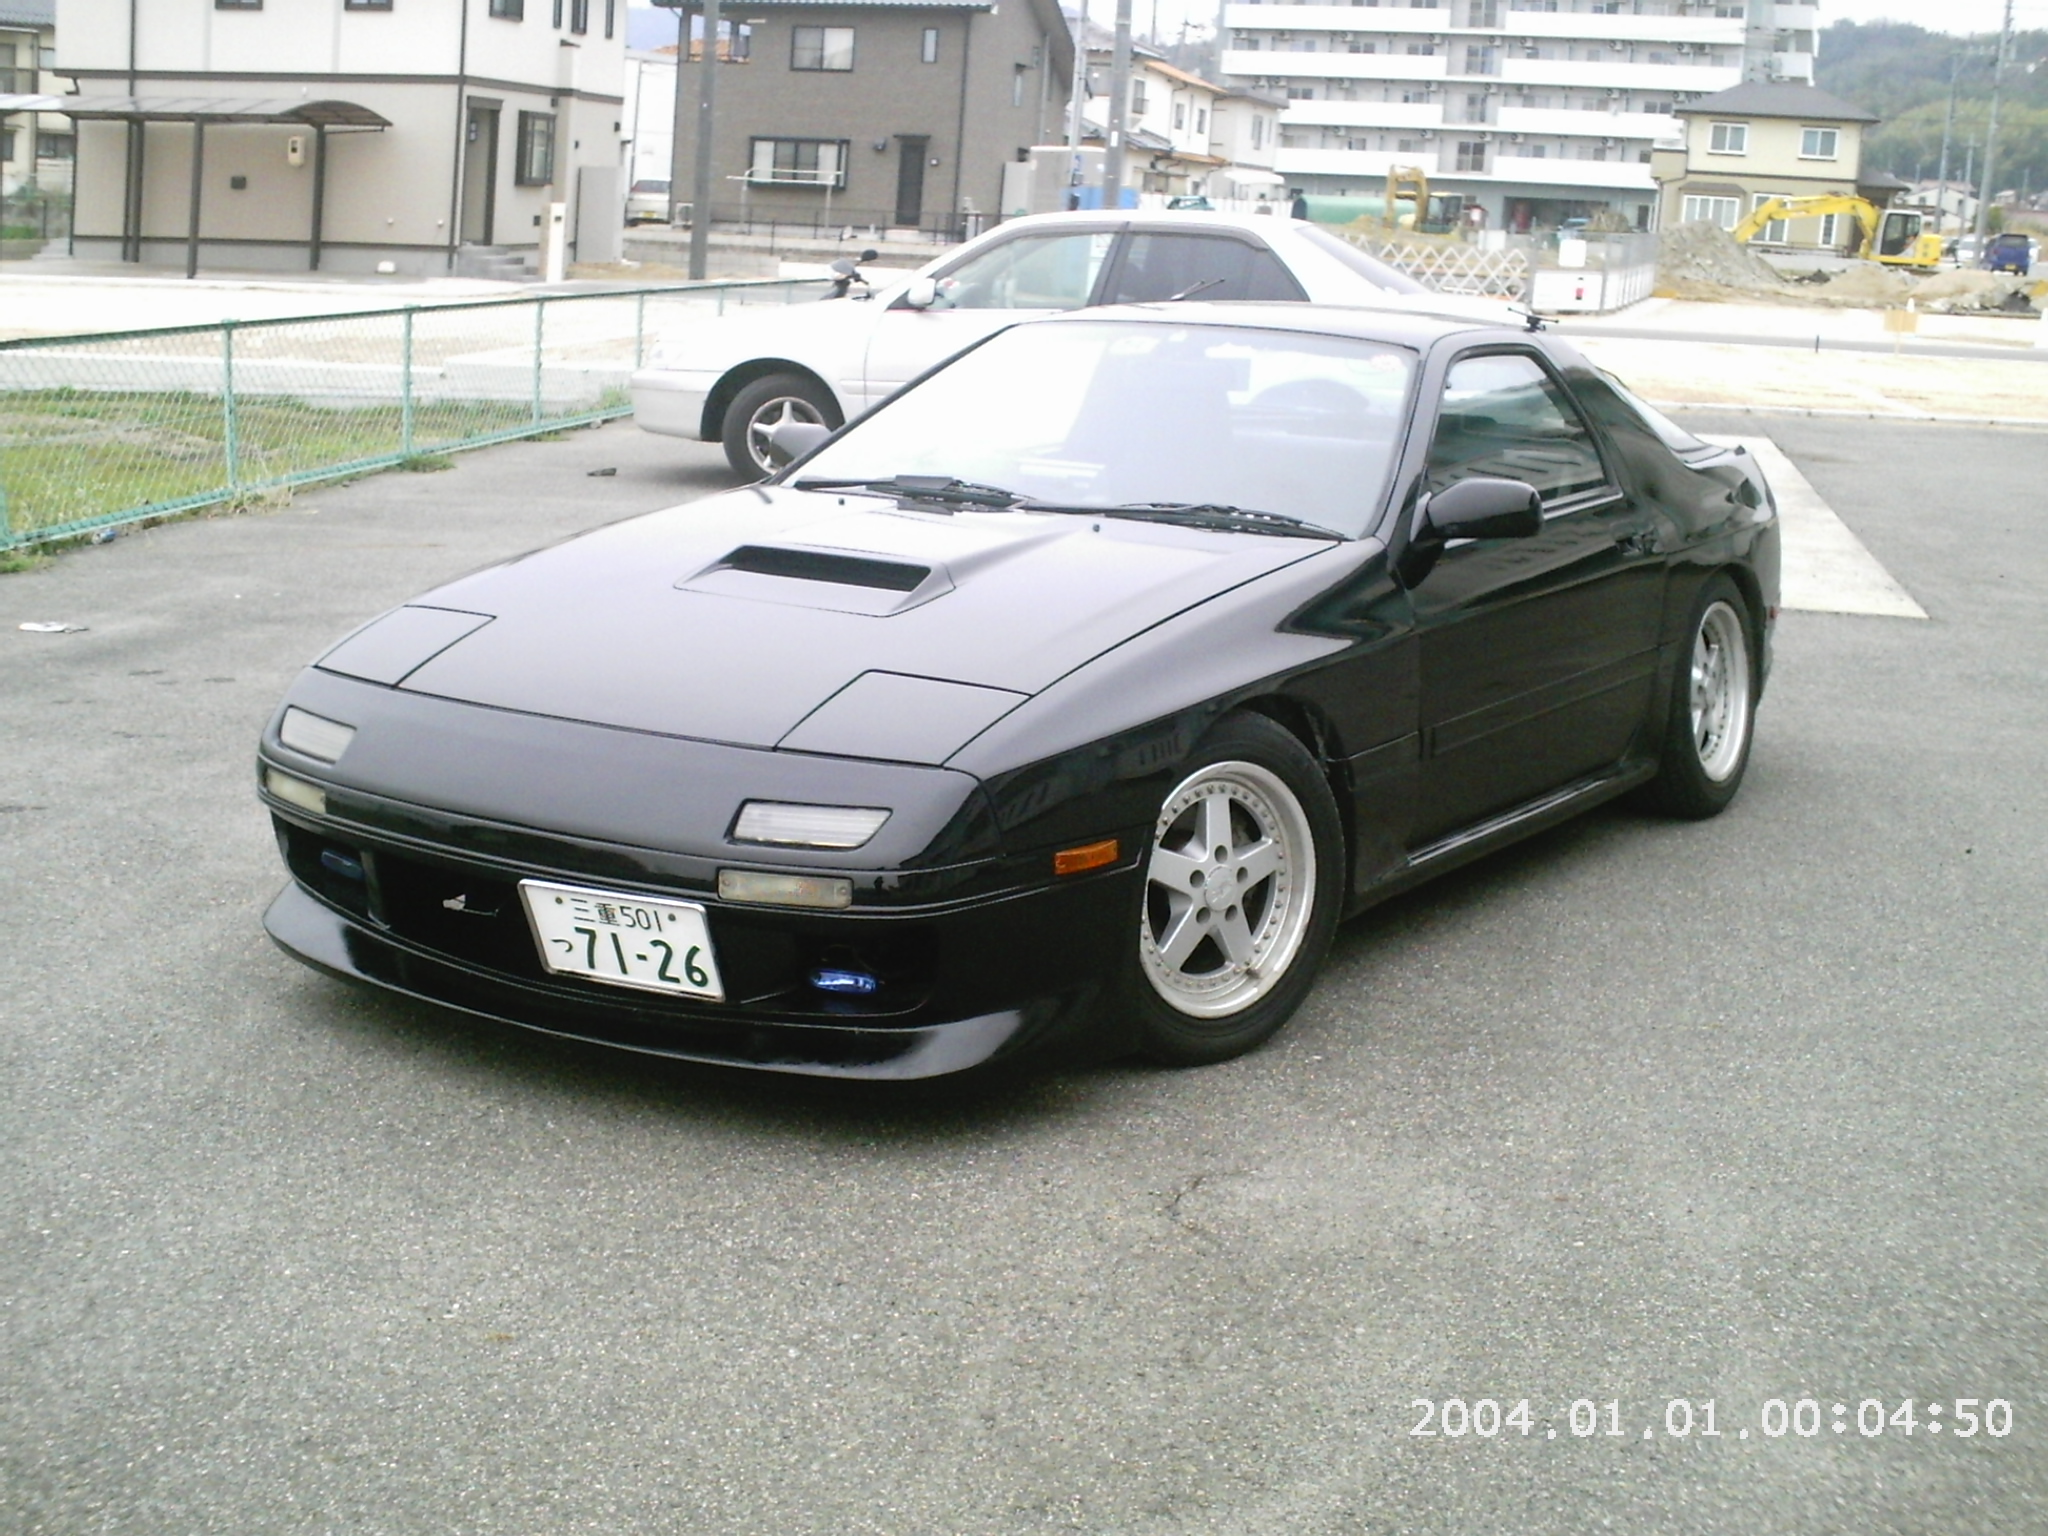 Japanese Tune Influence Fc Gallery Picture Heavy Page 28 Rx7club Com Mazda Rx7 Forum